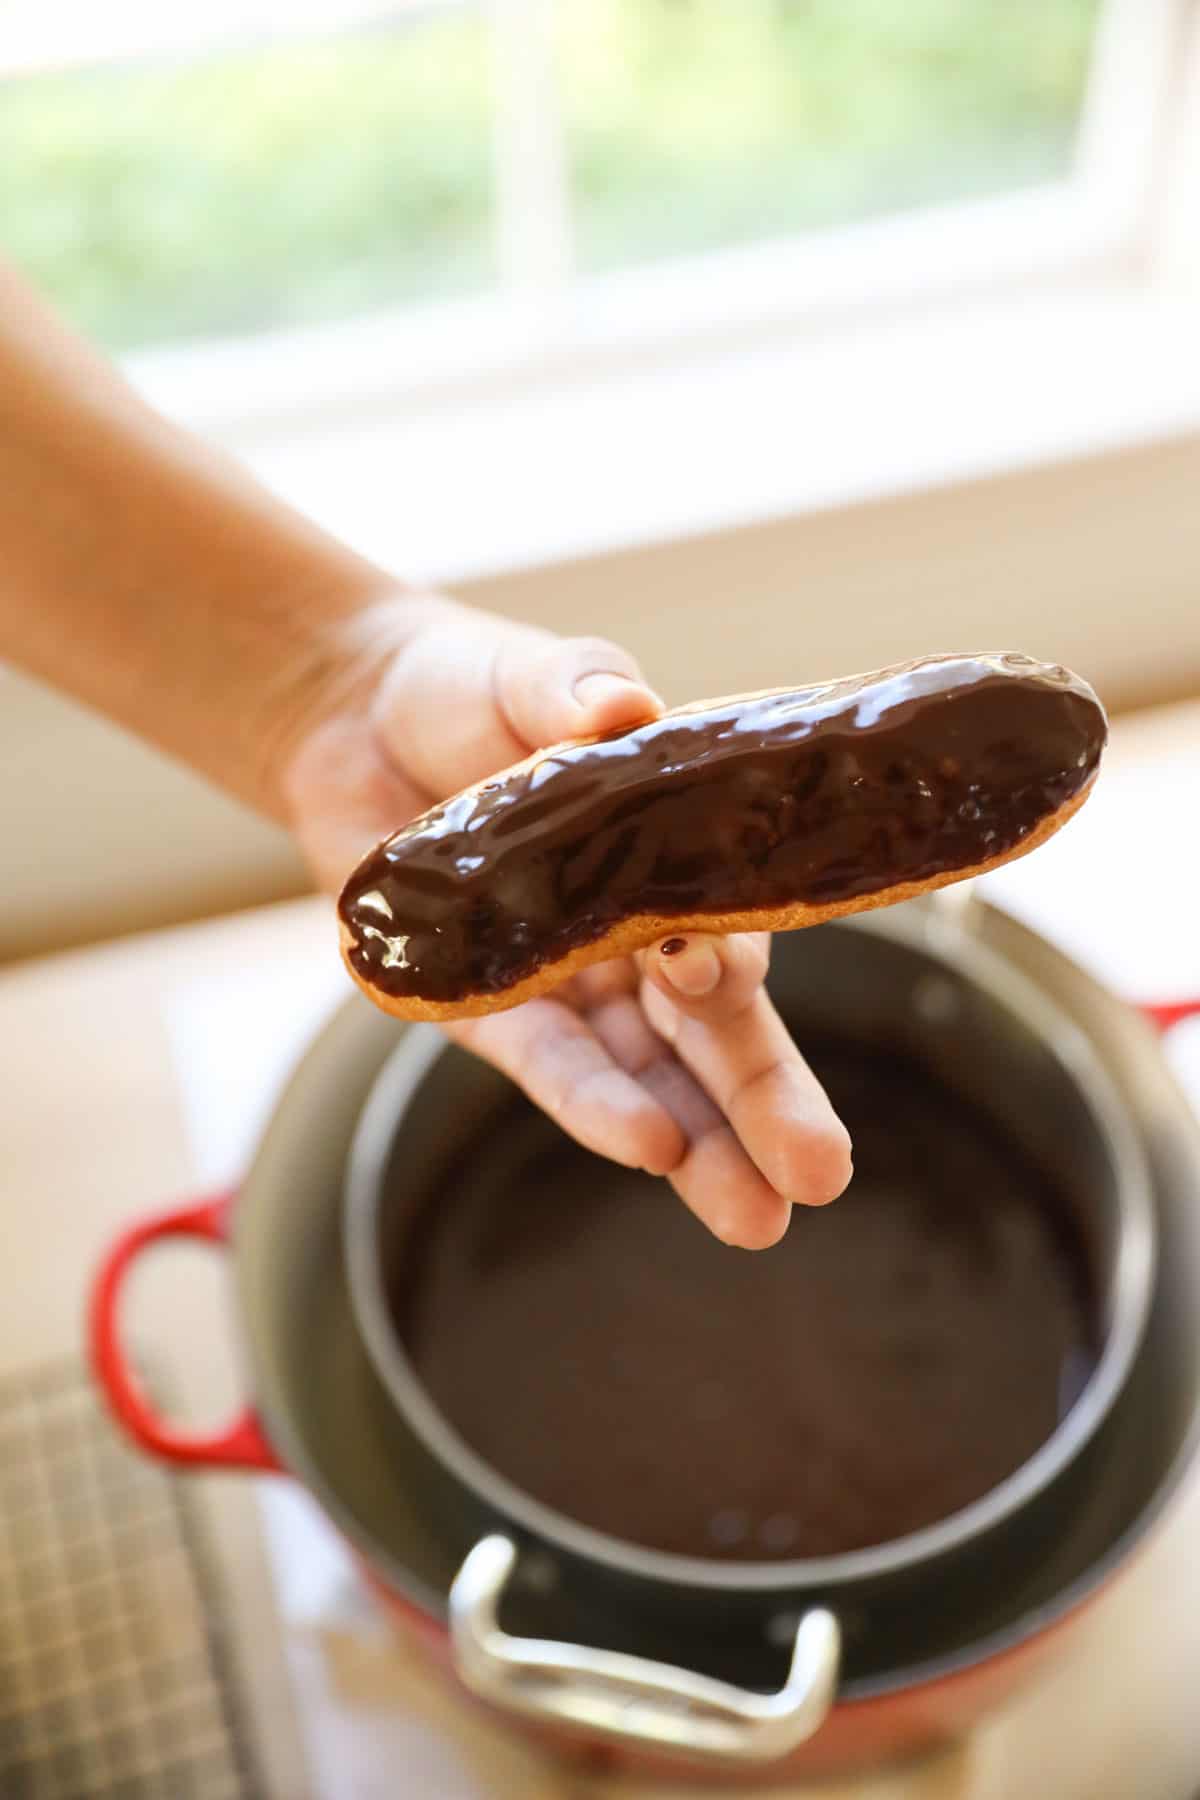 An eclair glazed with chocolate over a pot